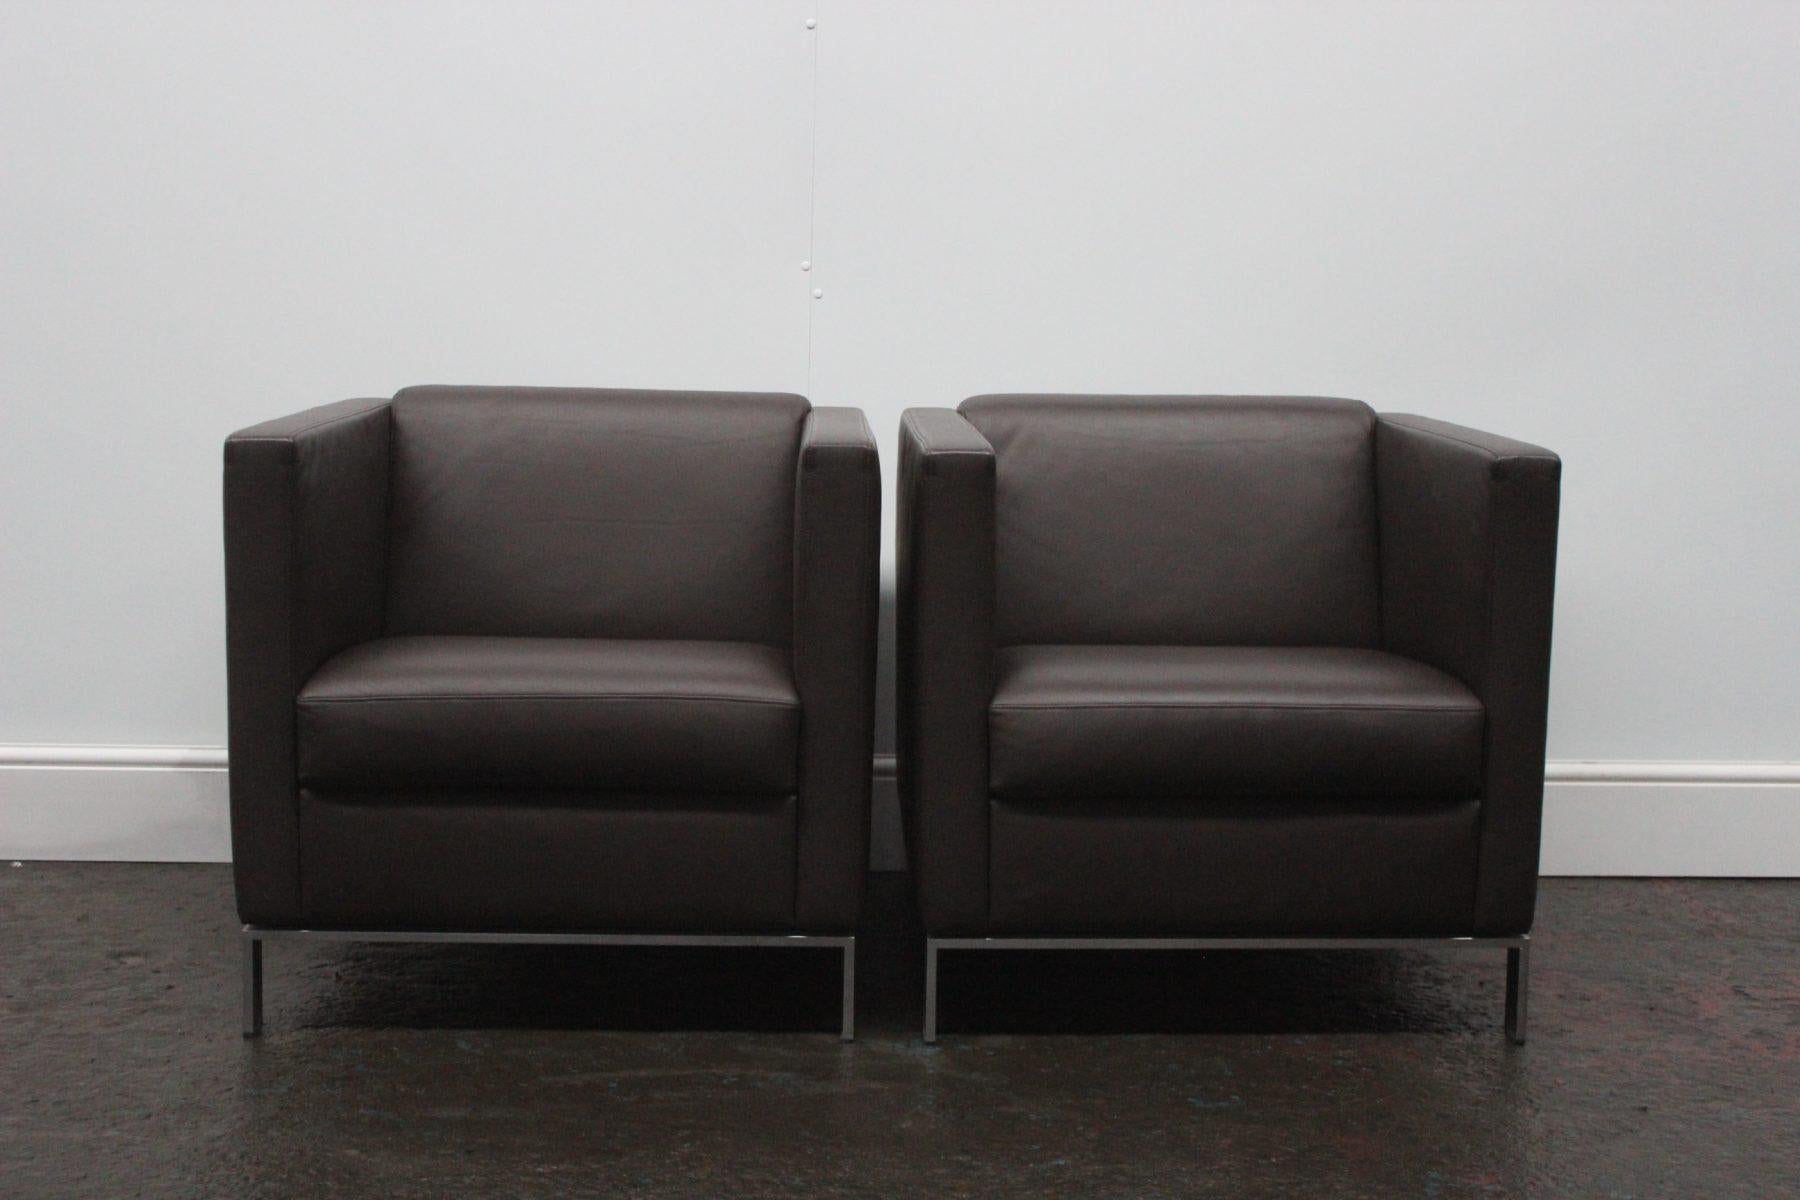 On offer on this occasion is a rare suite of “Foster 500” seating, consisting of an identical pair of “500.10” Armchairs from the world renown German furniture house of Walter Knoll, dressed in a sublime matt Dark-Brown leather, and with Matt